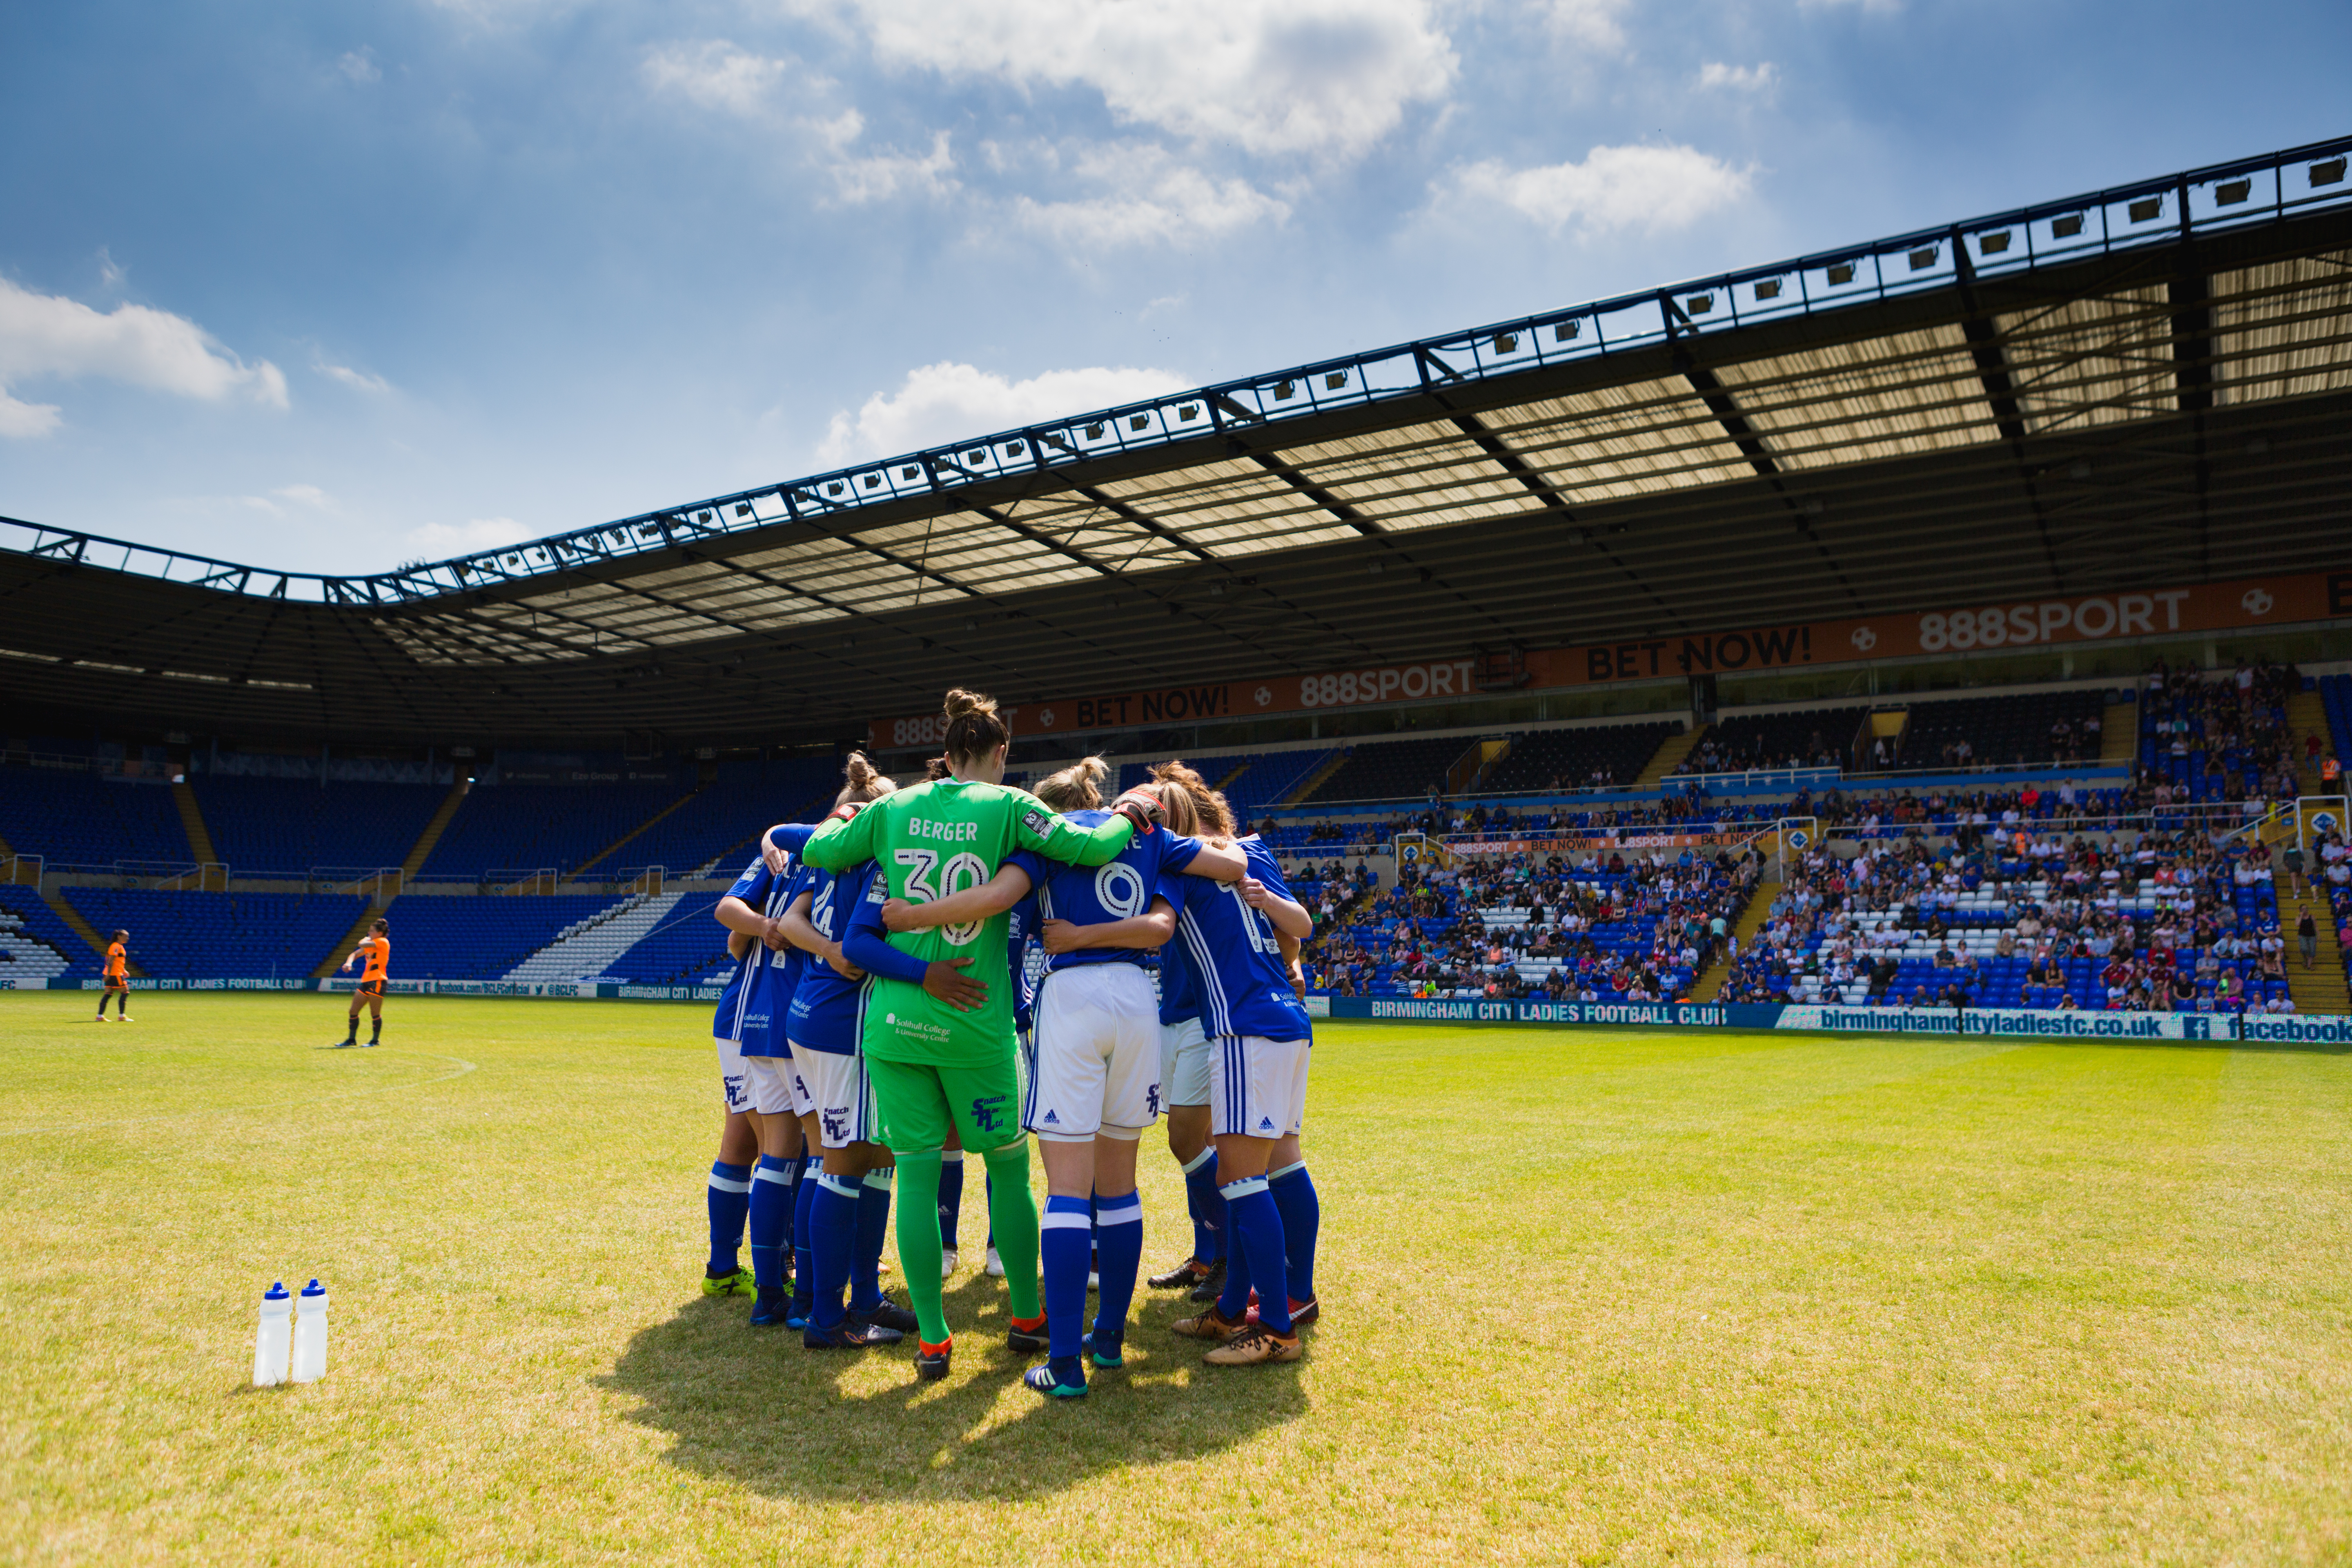 pre game huddle for the Birmingham City Ladies FC players